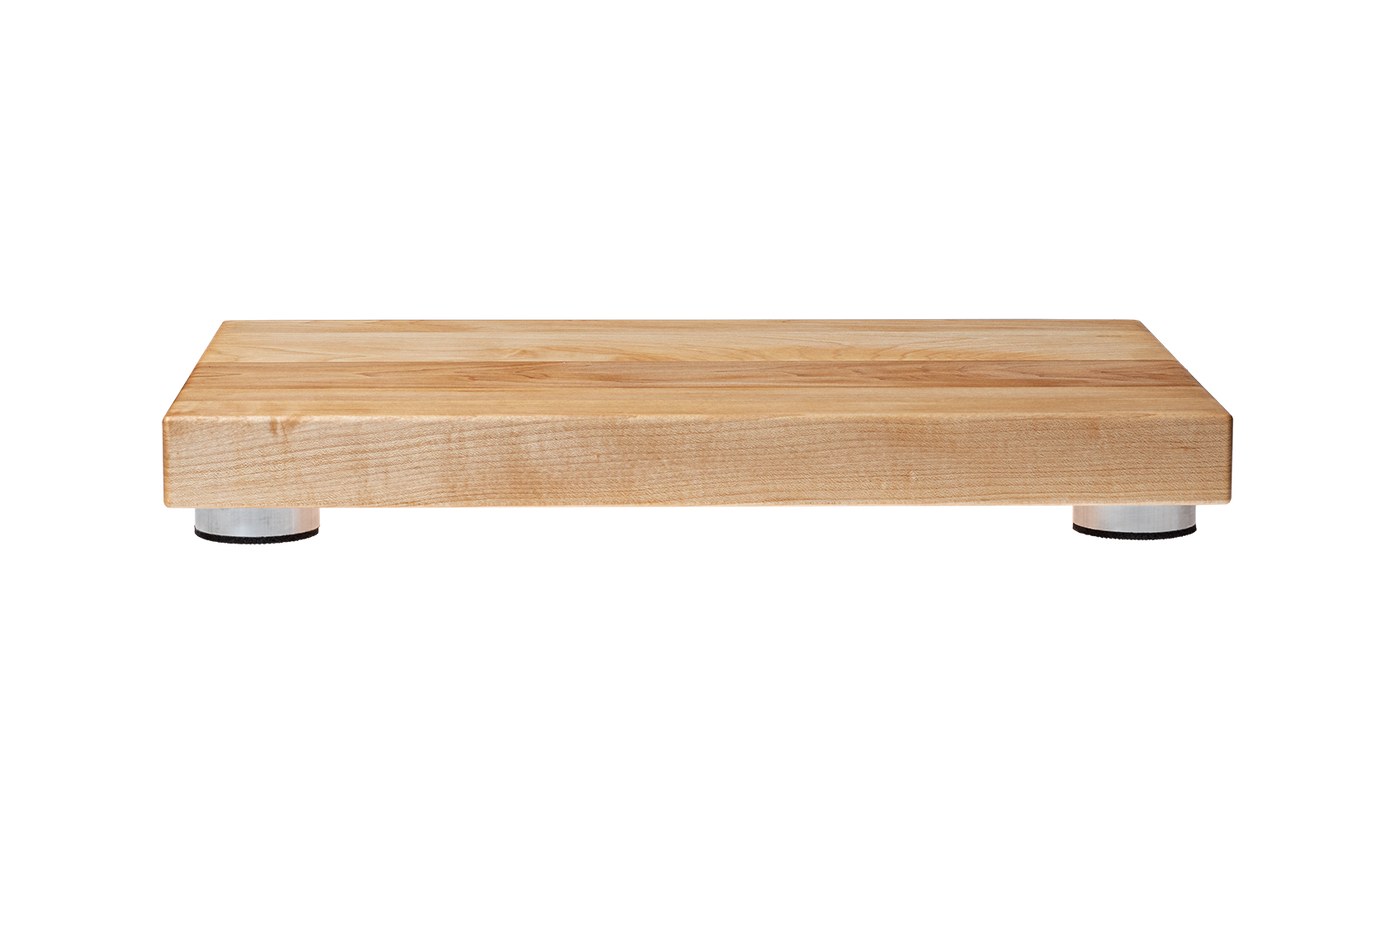 Cutting Board with Stabilizers. 17" length. (Flat Grain)